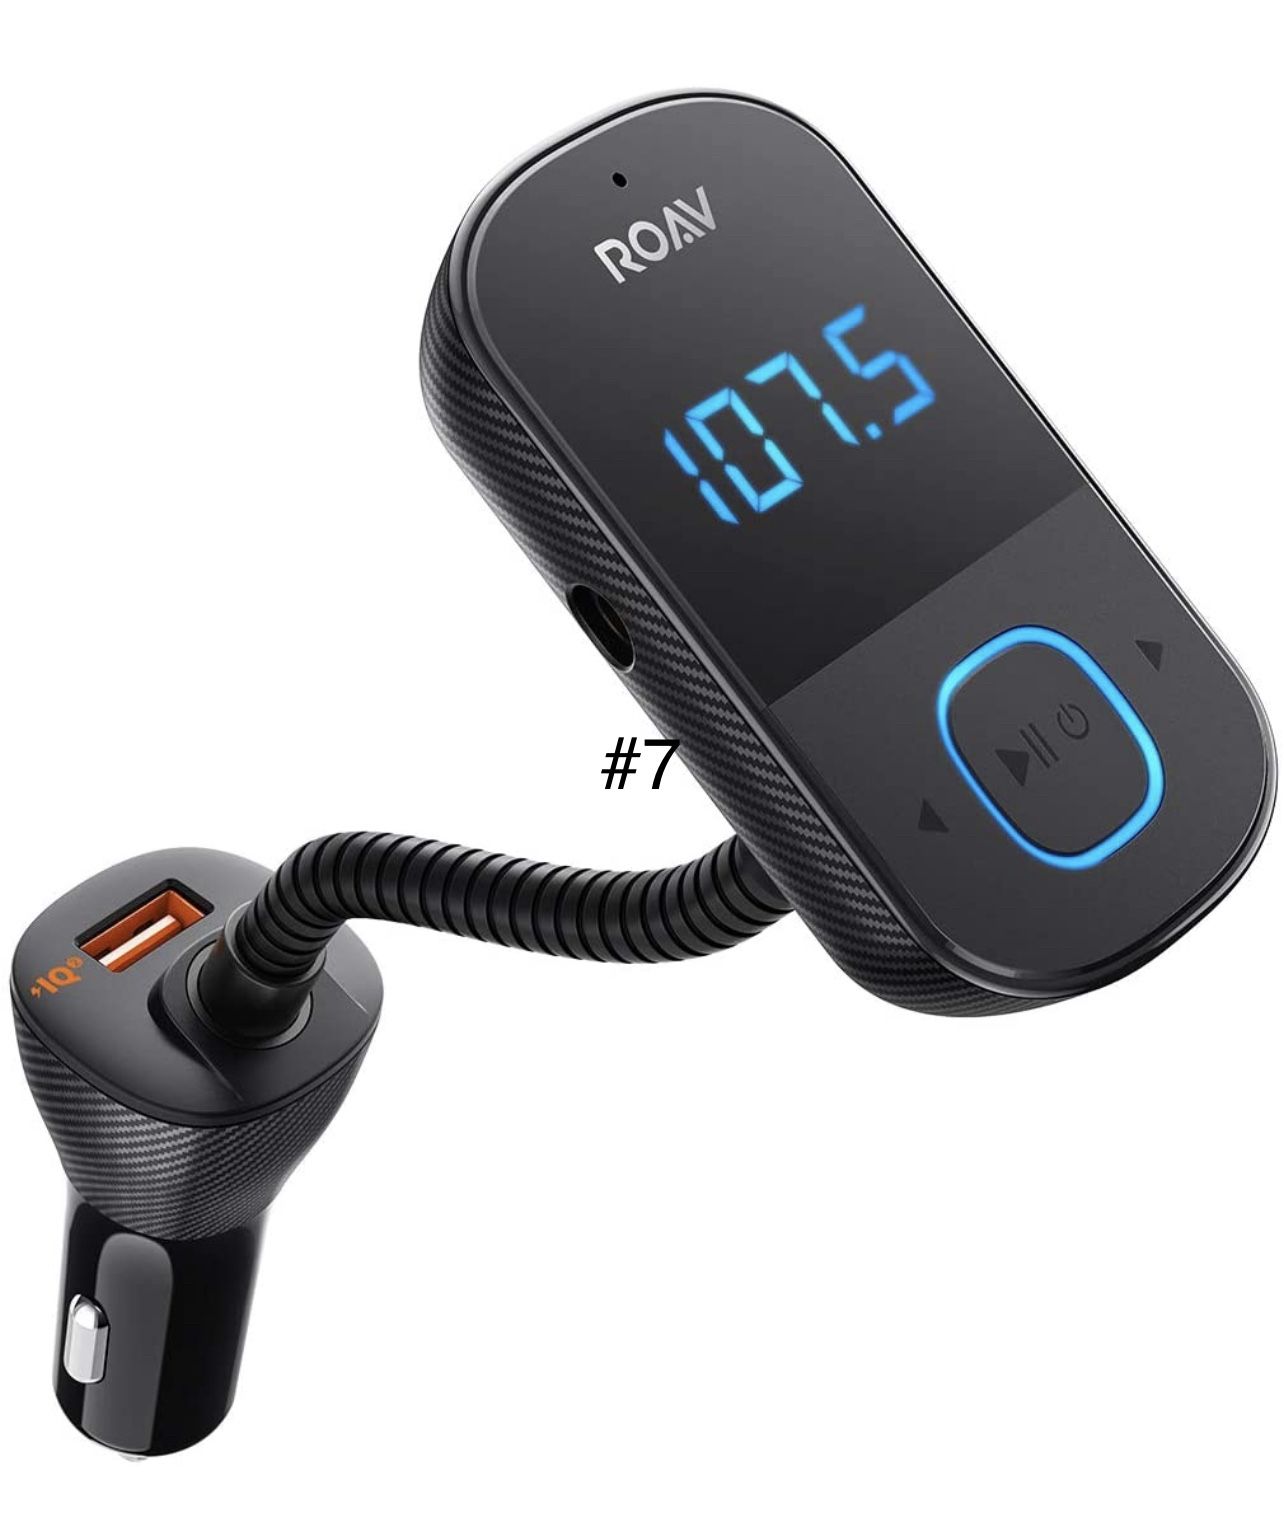 Anker Roav SmartCharge F3 Wireless Bluetooth 4.2 FM Transmitter for Car, Audio Adapter and Reciever Car Kit, 1.44 Inch Display, Dedicated App, Quick C